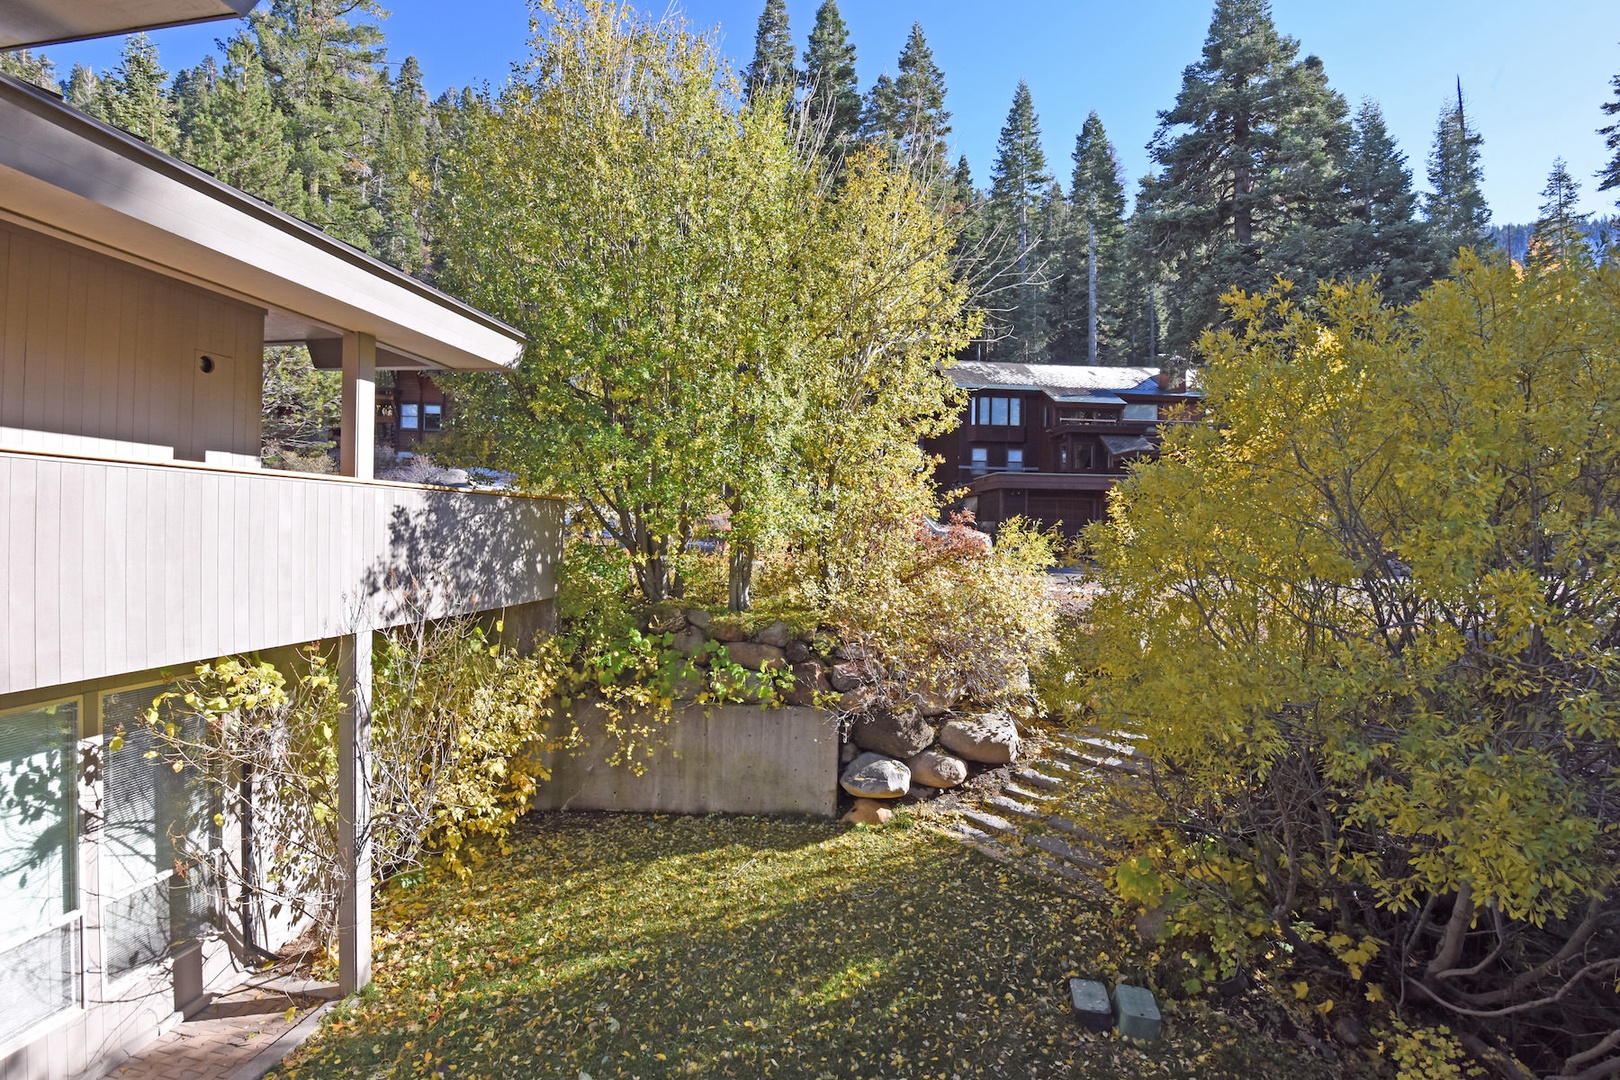 Located in Alpine Meadows, Close to Squaw Valley too!